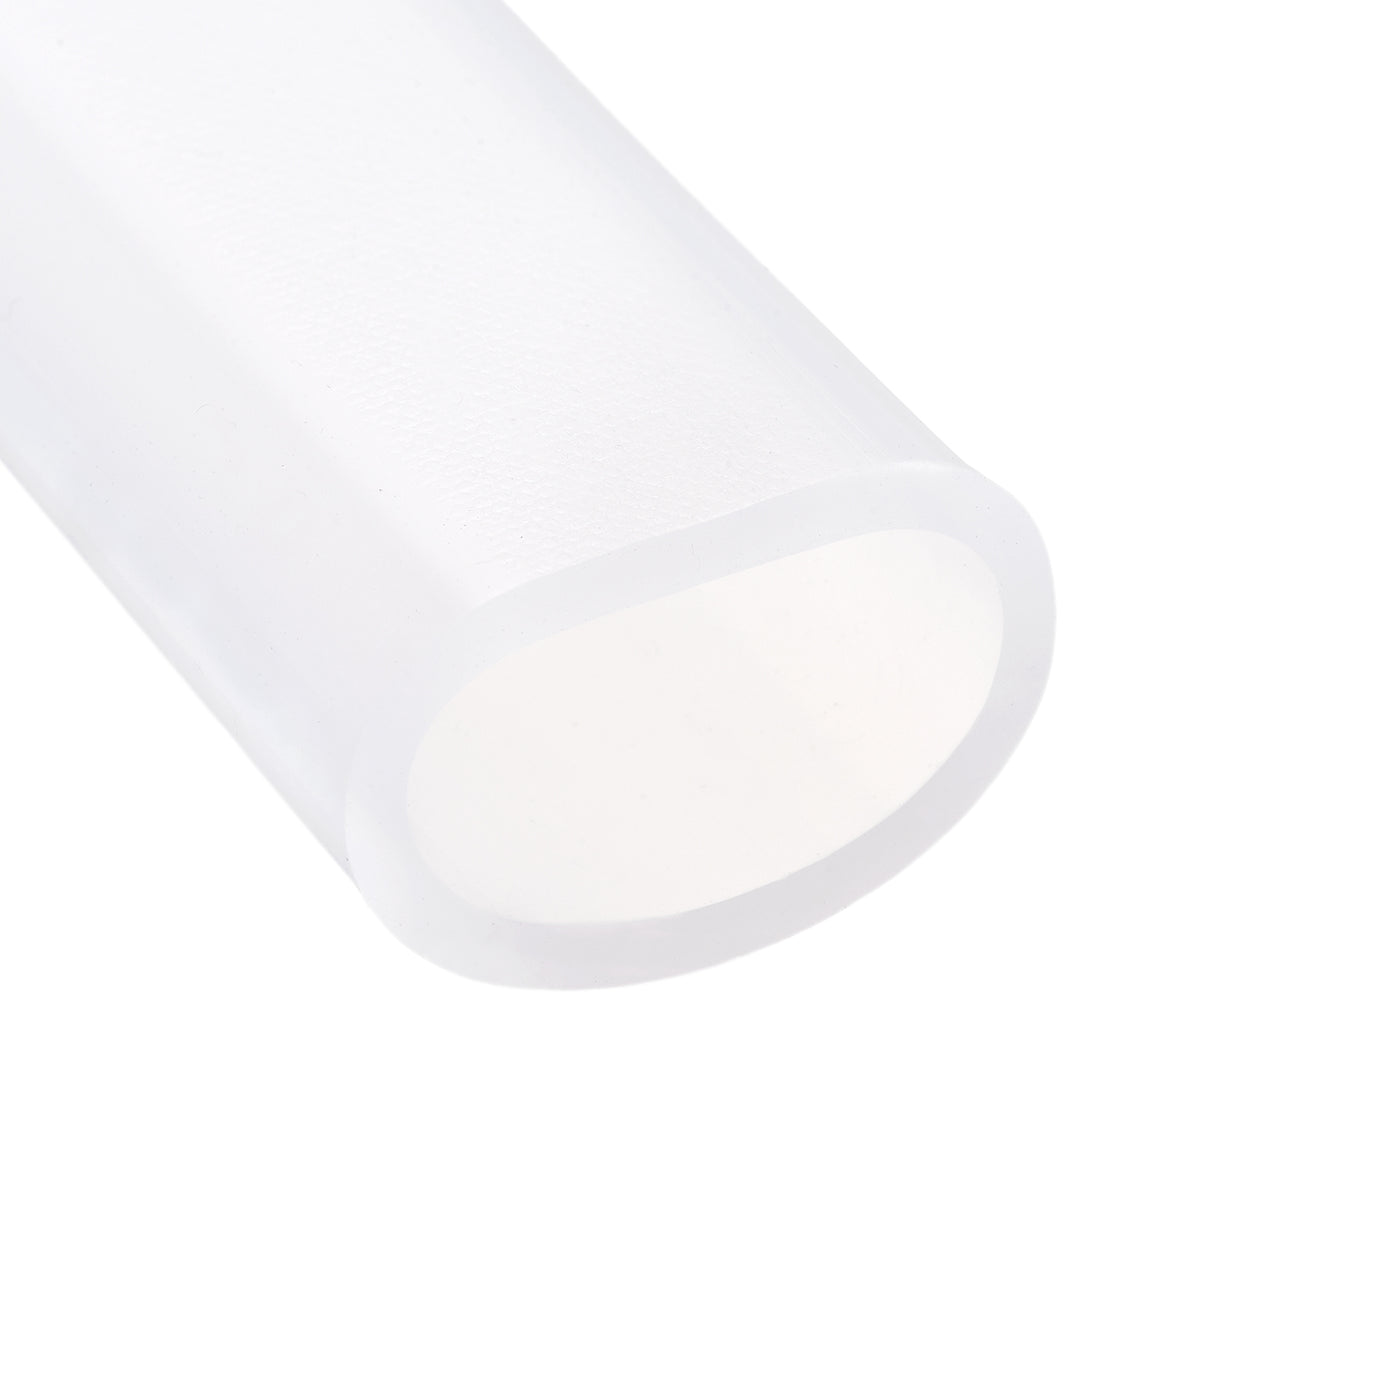 uxcell Uxcell Silicone Tubing 63/64" ID, 17/32" OD 1Pcs 0.33 Ft for Pump Transfer, Transparent